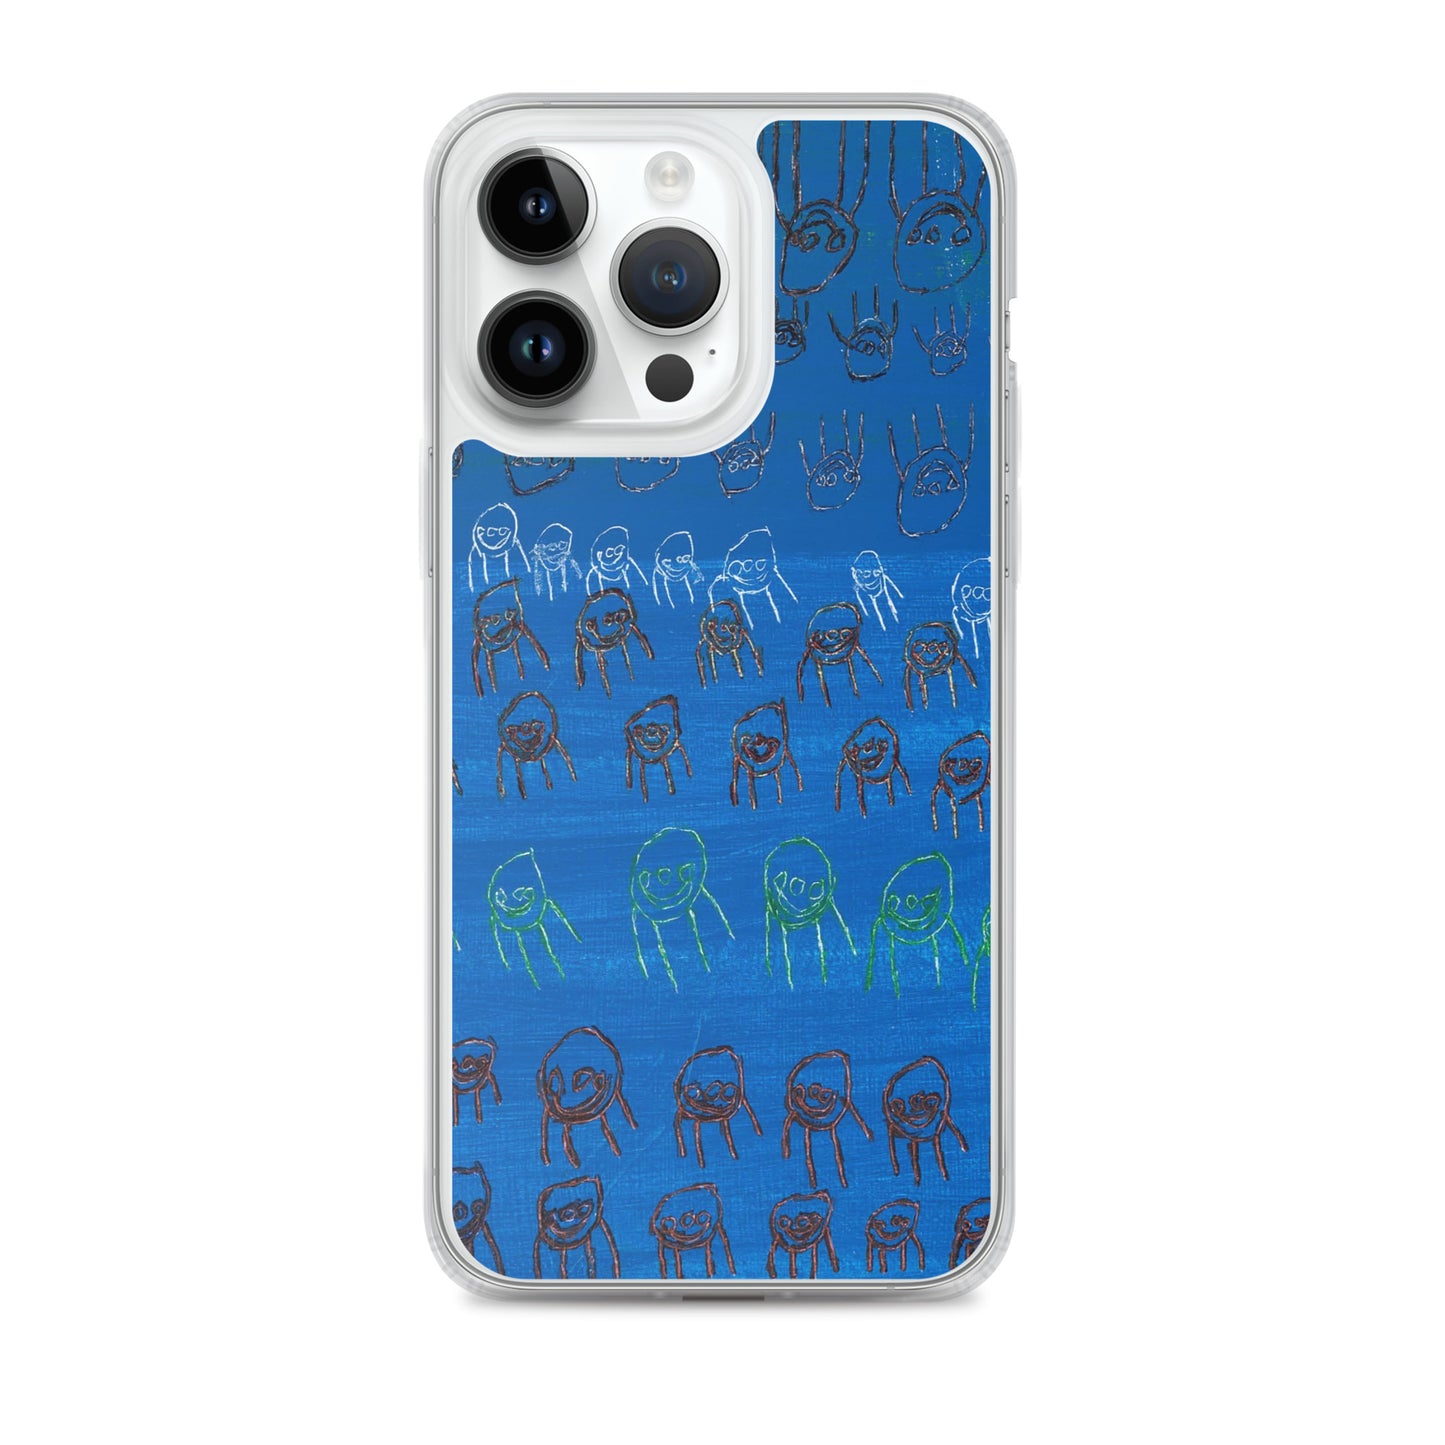 iPhone Case - "Colourful People"